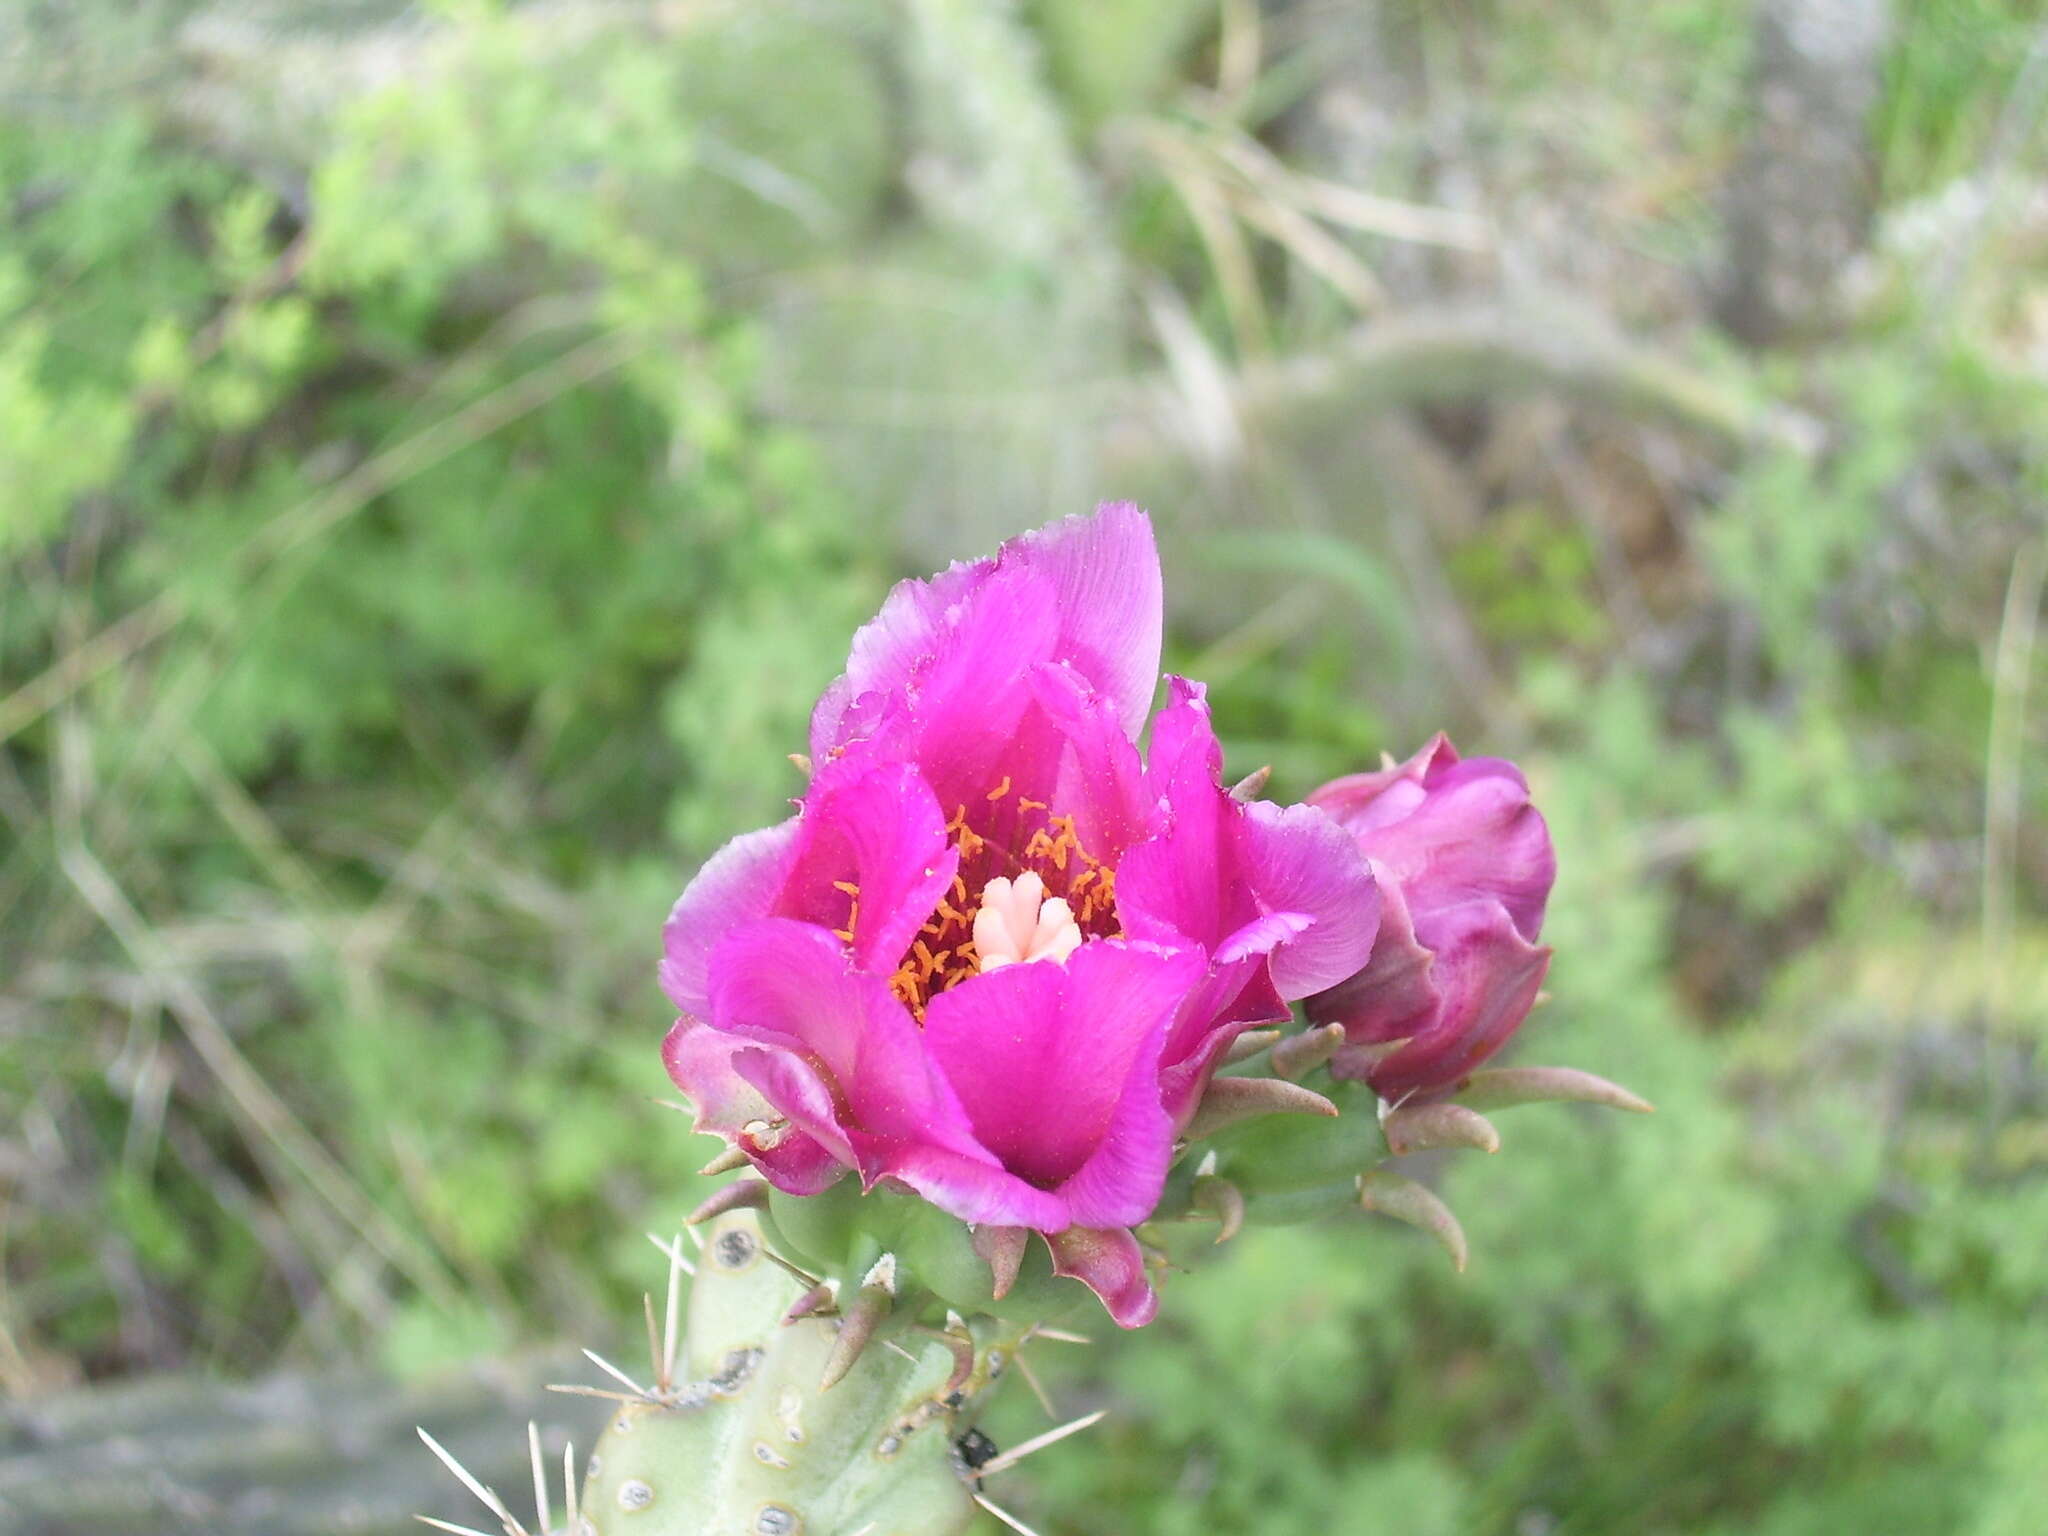 Image of Cylindropuntia imbricata subsp. spinotecta (Griffiths) M. A. Baker